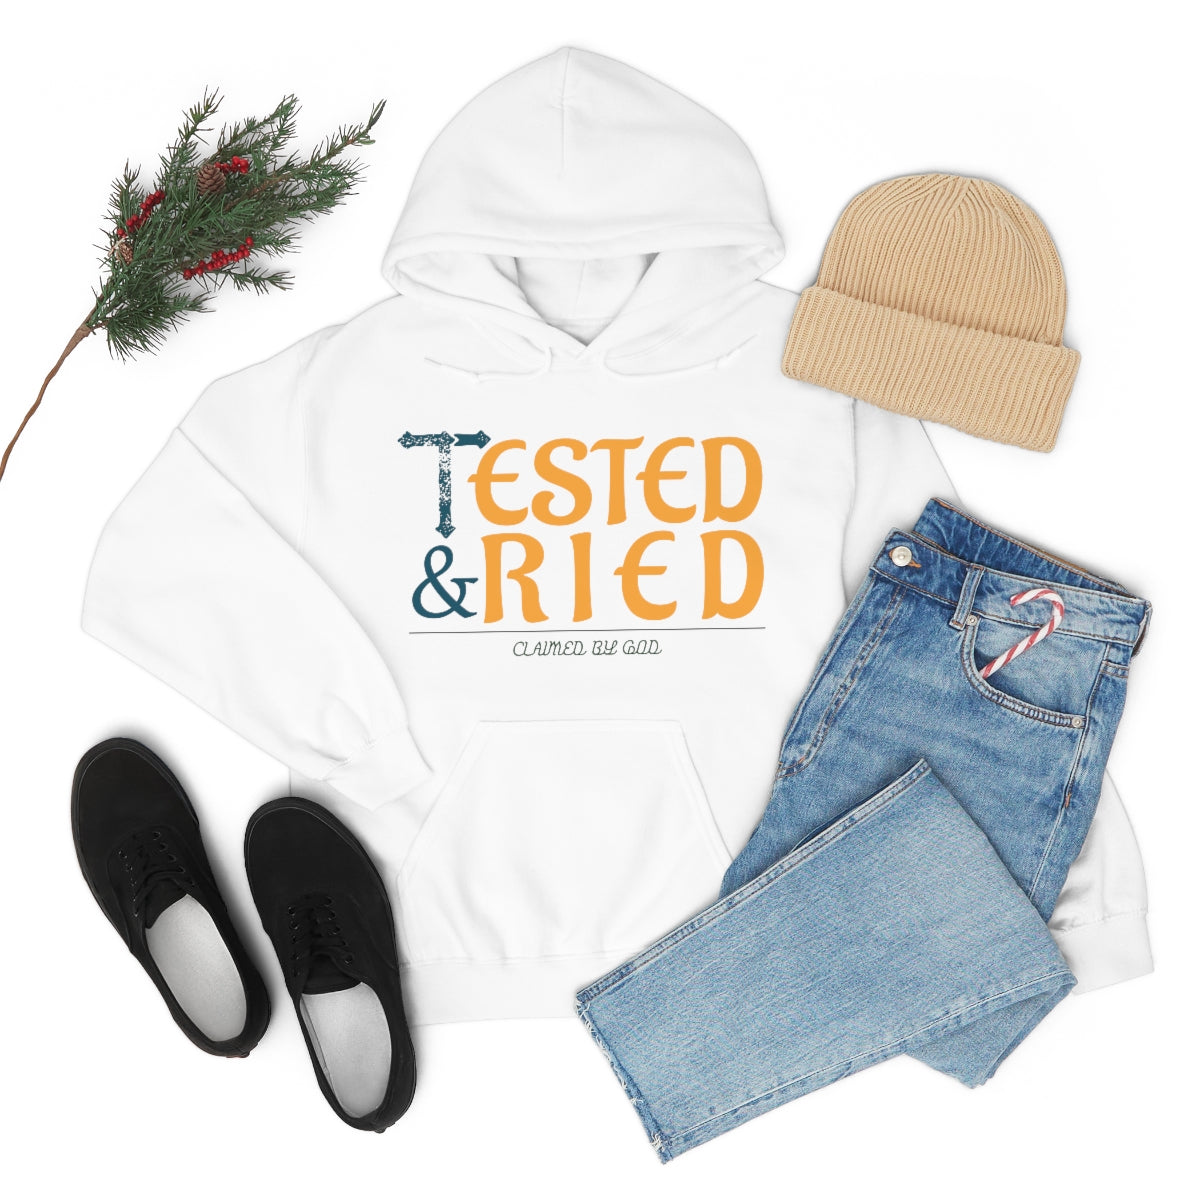 tested and tried Unisex Hooded Sweatshirt Printify